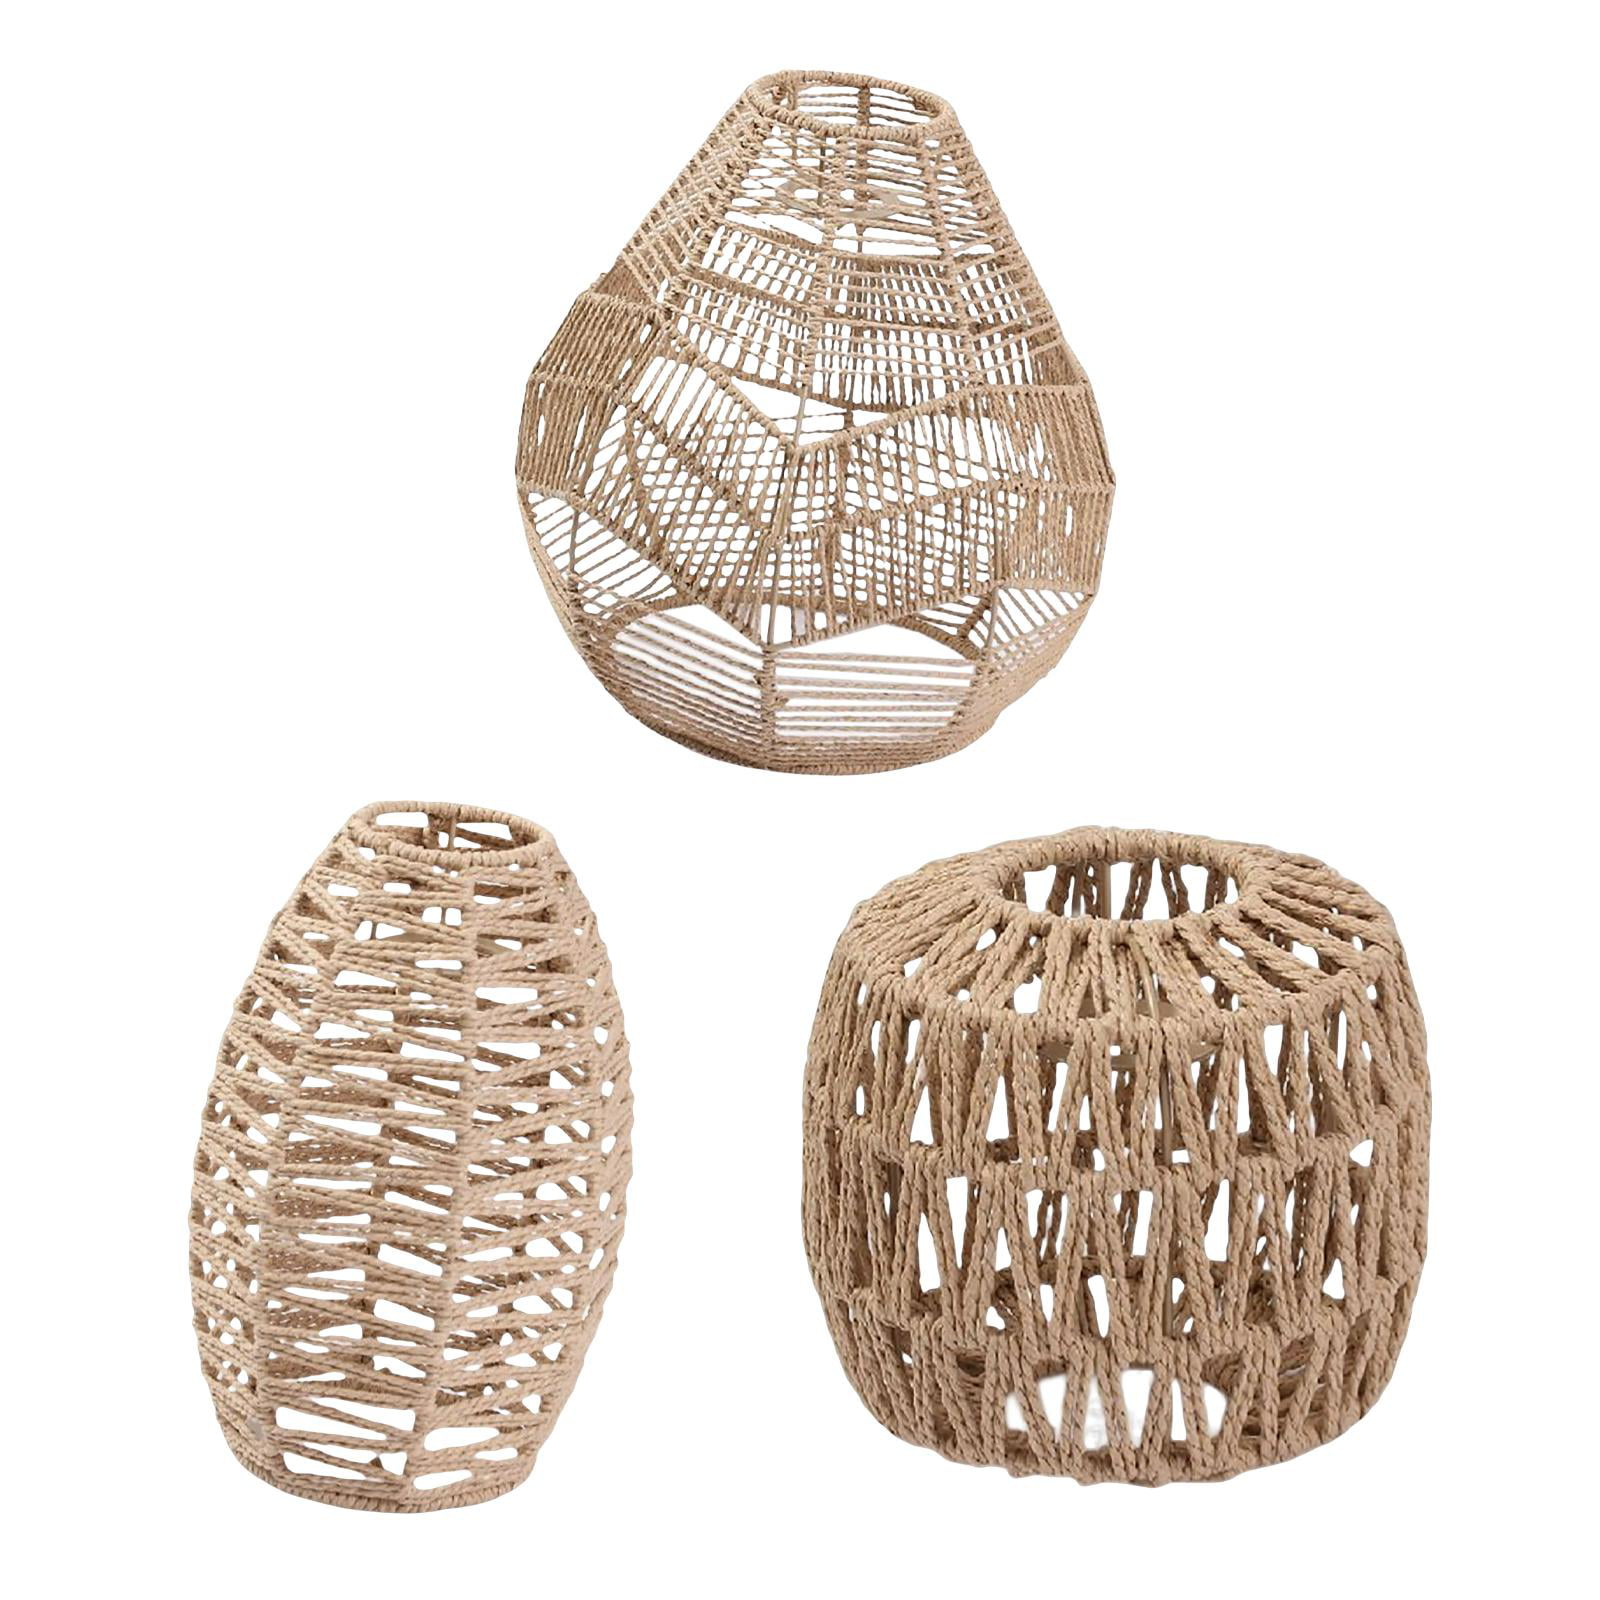 3x Multicolor Rattan Wicker Ball Ceiling Light Pendant Shade Lampshade Home 